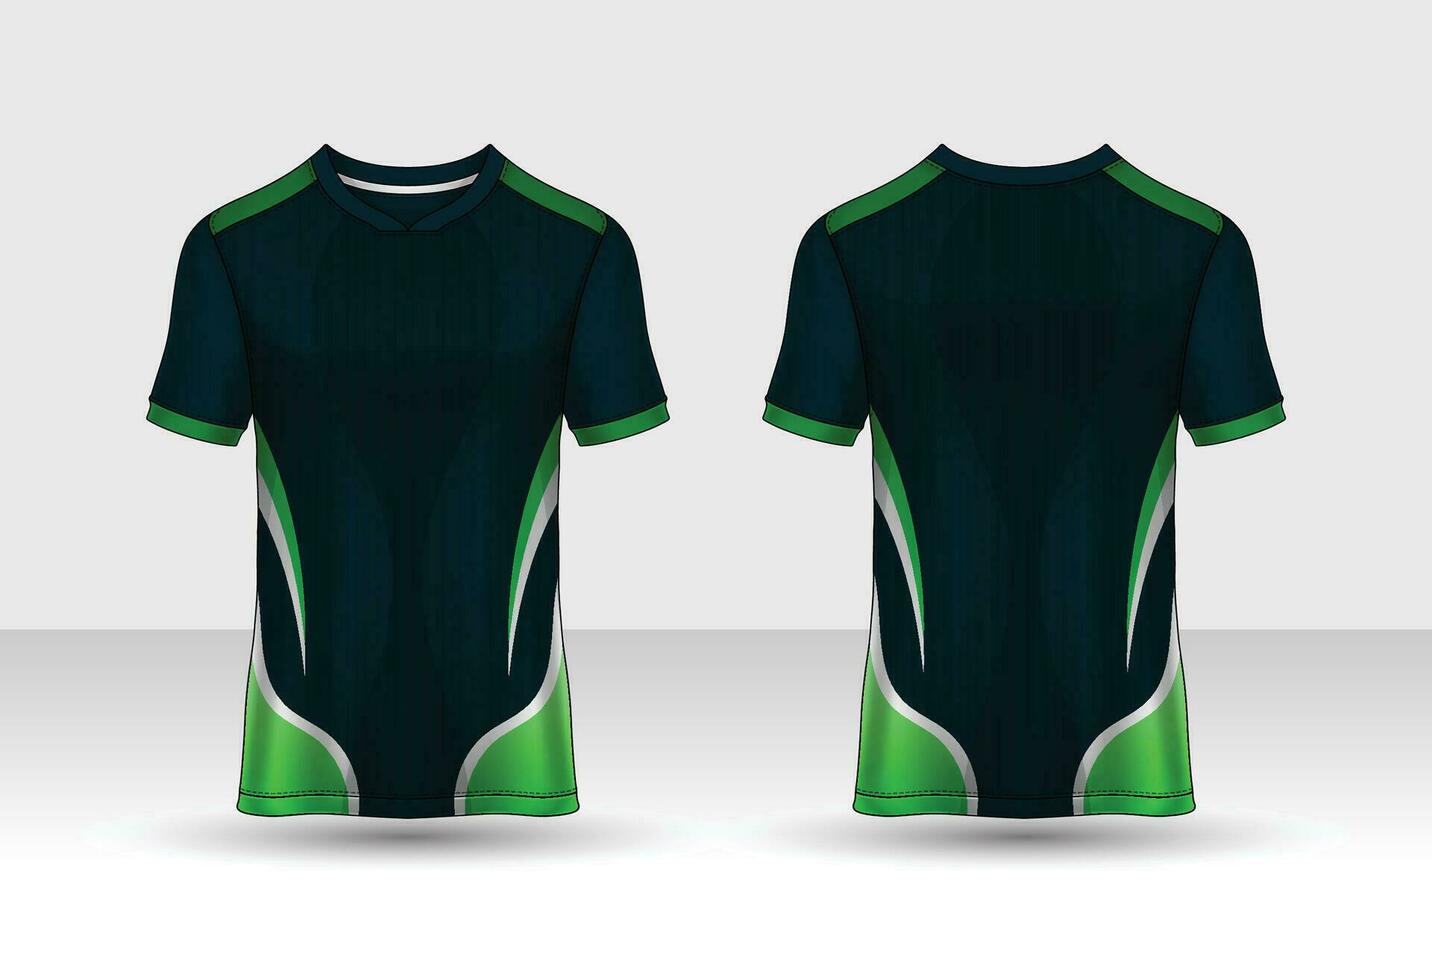 t-shirt sport design template, Soccer jersey mockup for football club. uniform front and back view. vector